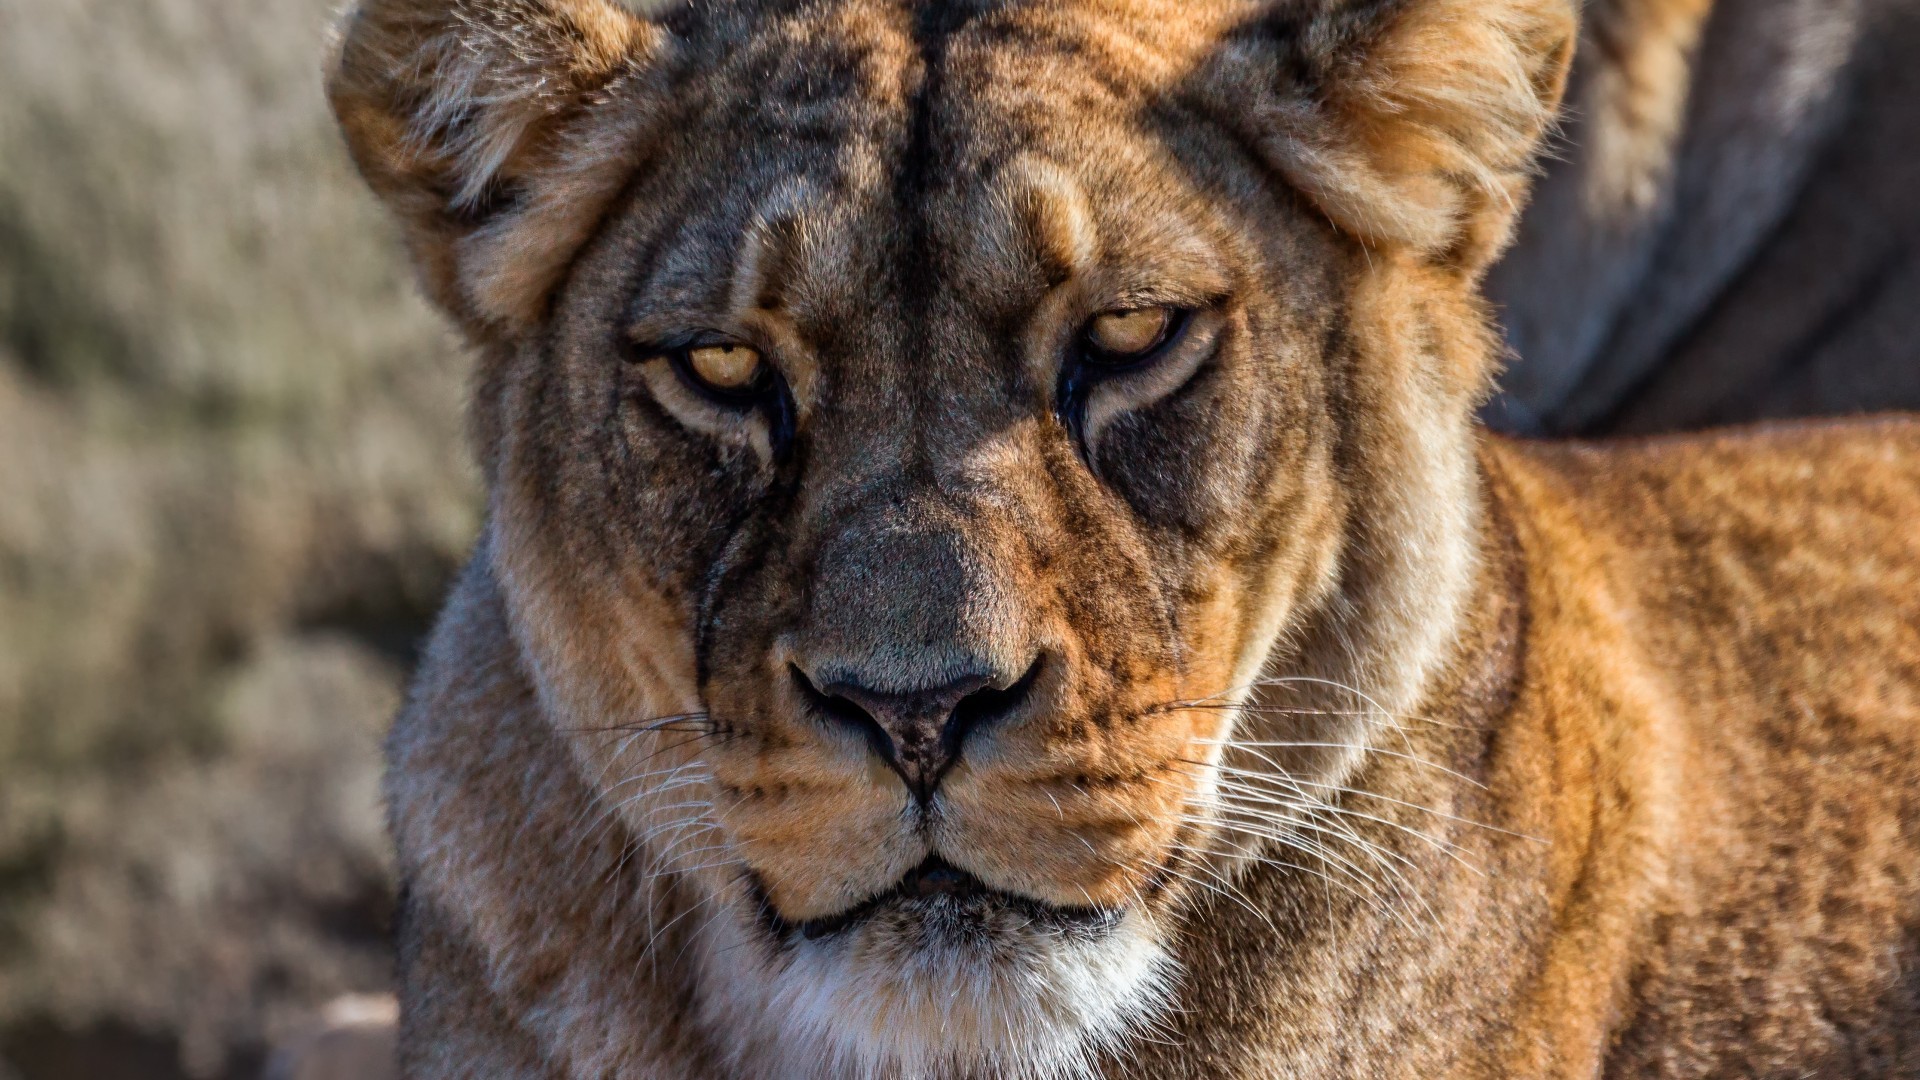 Lion, Angry Face, Predator, Big Cats - Hd Lion And Lioness - HD Wallpaper 